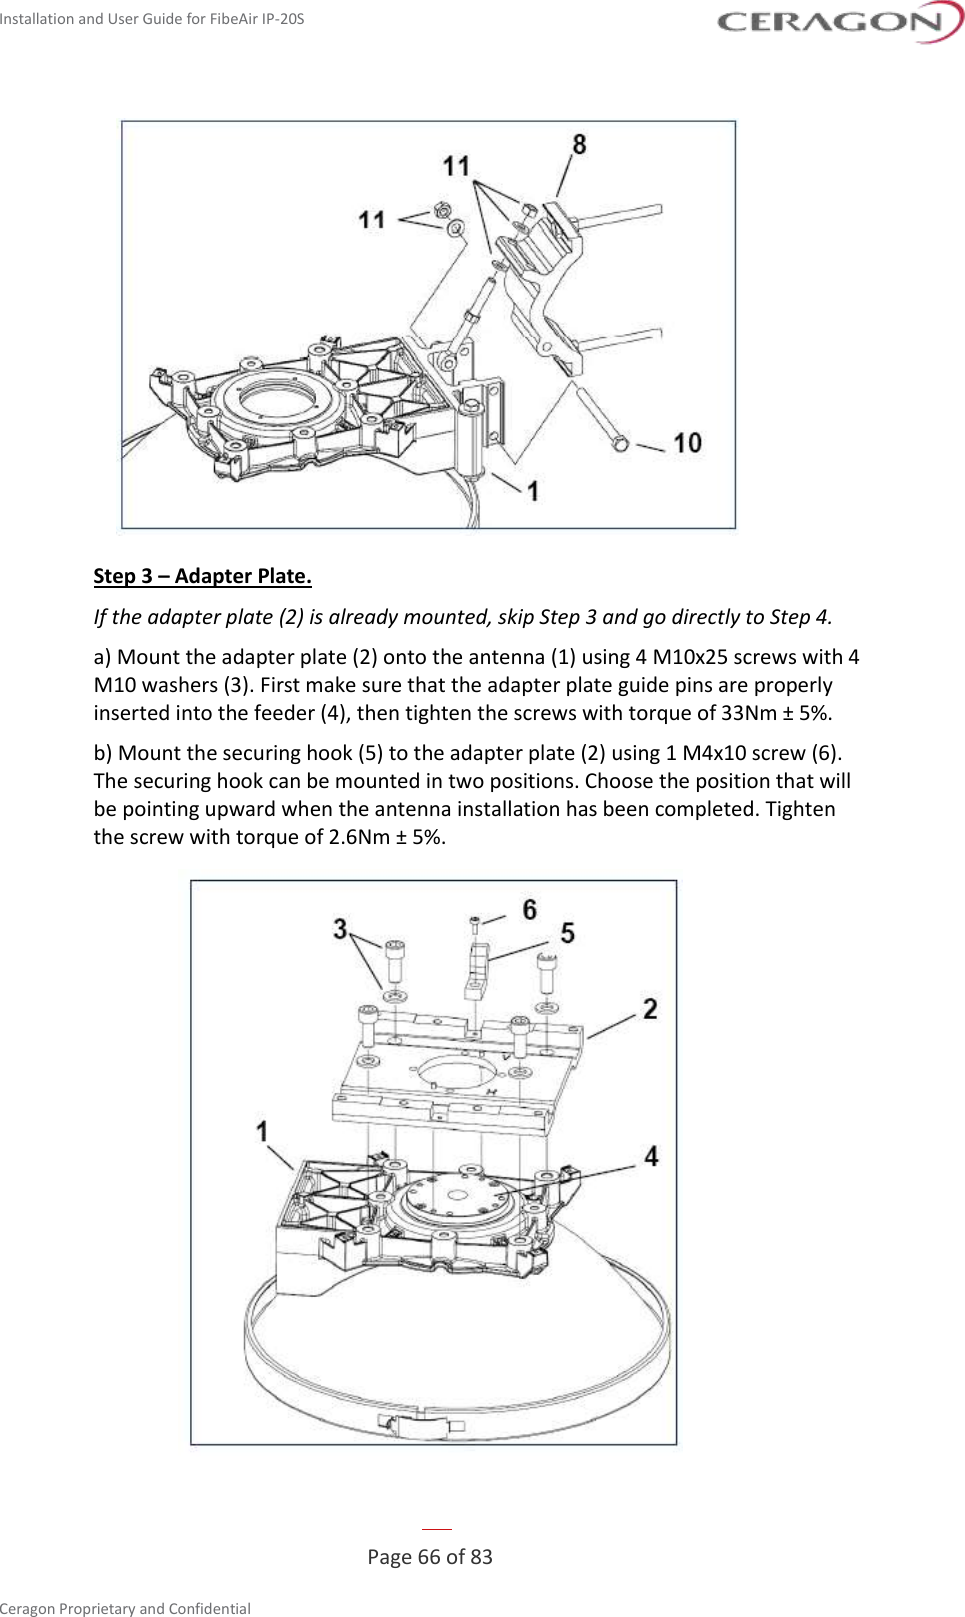 Installation and User Guide for FibeAir IP-20S   Page 66 of 83  Ceragon Proprietary and Confidential      Step 3 – Adapter Plate. If the adapter plate (2) is already mounted, skip Step 3 and go directly to Step 4. a) Mount the adapter plate (2) onto the antenna (1) using 4 M10x25 screws with 4 M10 washers (3). First make sure that the adapter plate guide pins are properly inserted into the feeder (4), then tighten the screws with torque of 33Nm ± 5%. b) Mount the securing hook (5) to the adapter plate (2) using 1 M4x10 screw (6). The securing hook can be mounted in two positions. Choose the position that will be pointing upward when the antenna installation has been completed. Tighten the screw with torque of 2.6Nm ± 5%.  